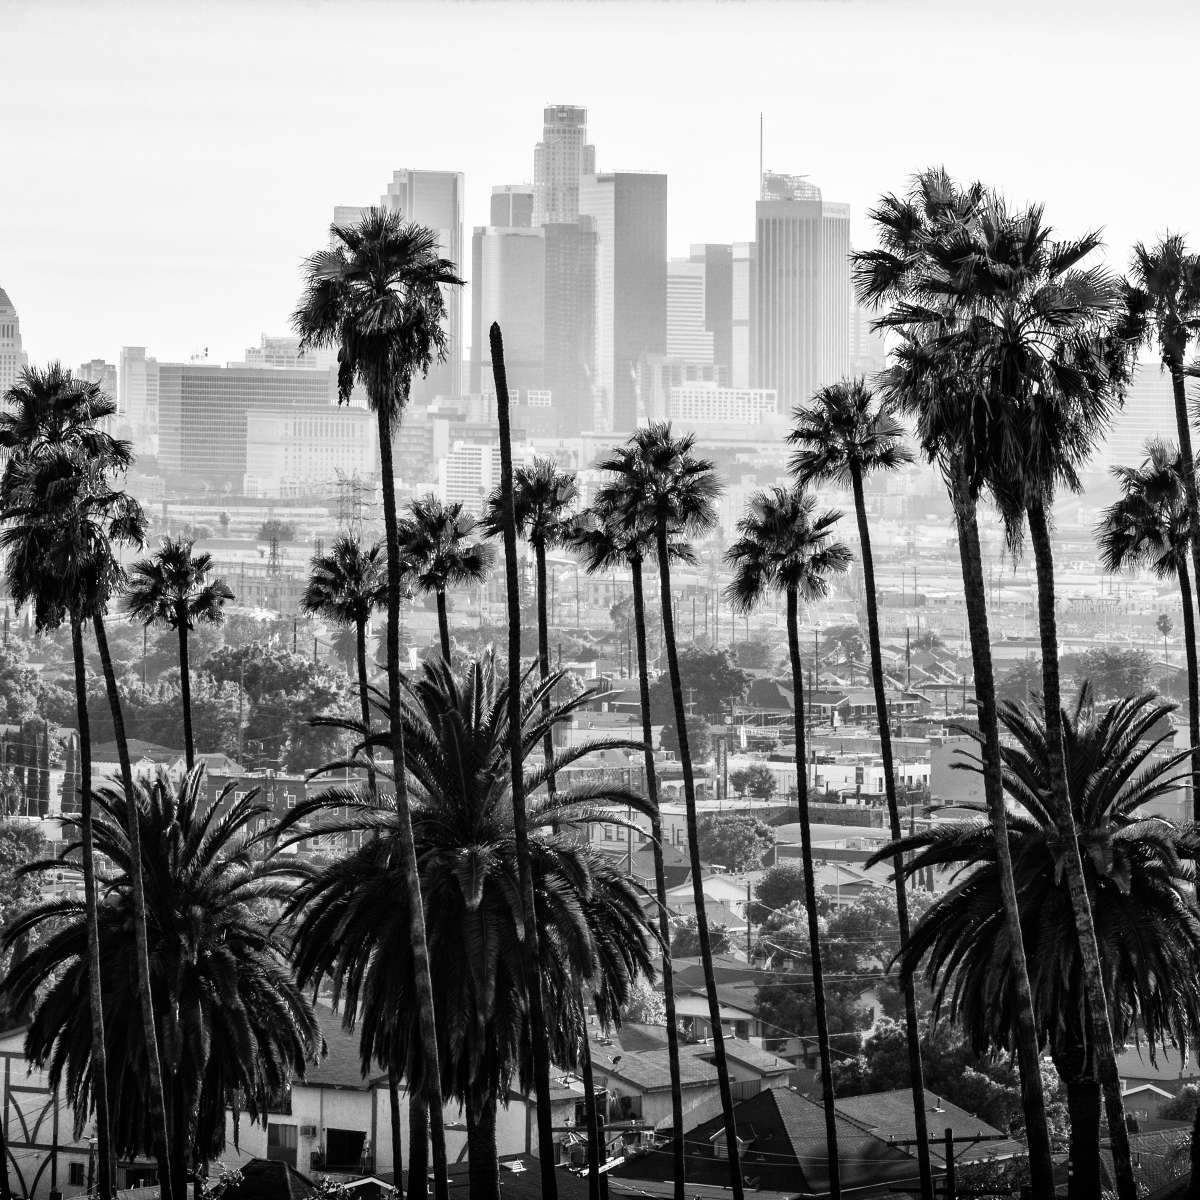 los angeles skyline black and white drawing